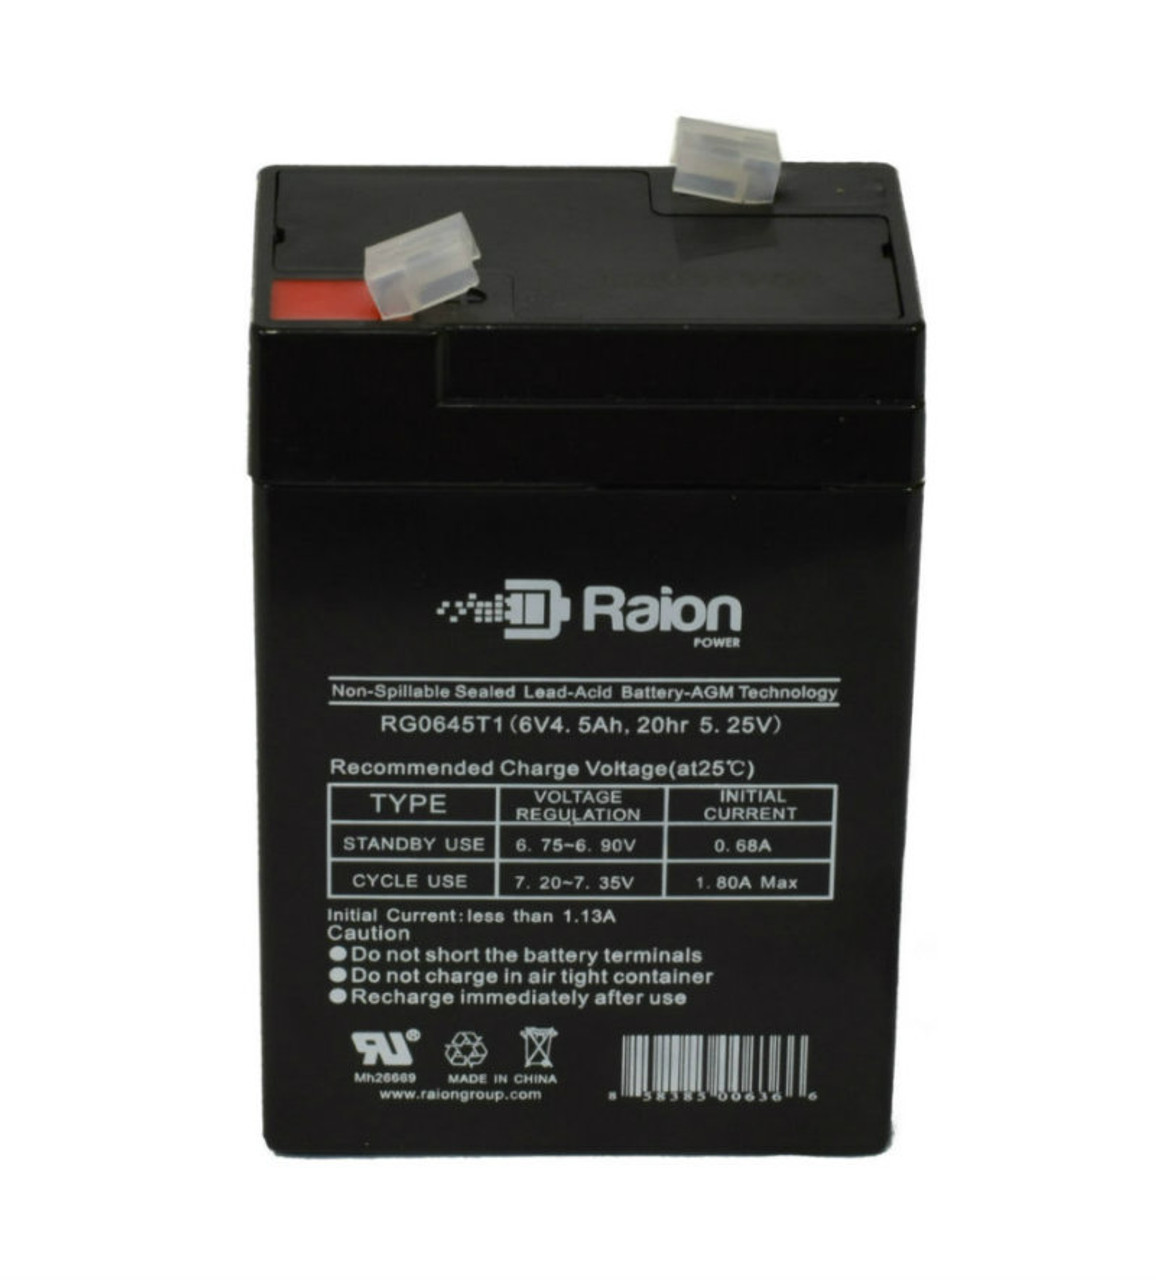 Raion Power RG0645T1 Replacement Battery Cartridge for Holophane 92804